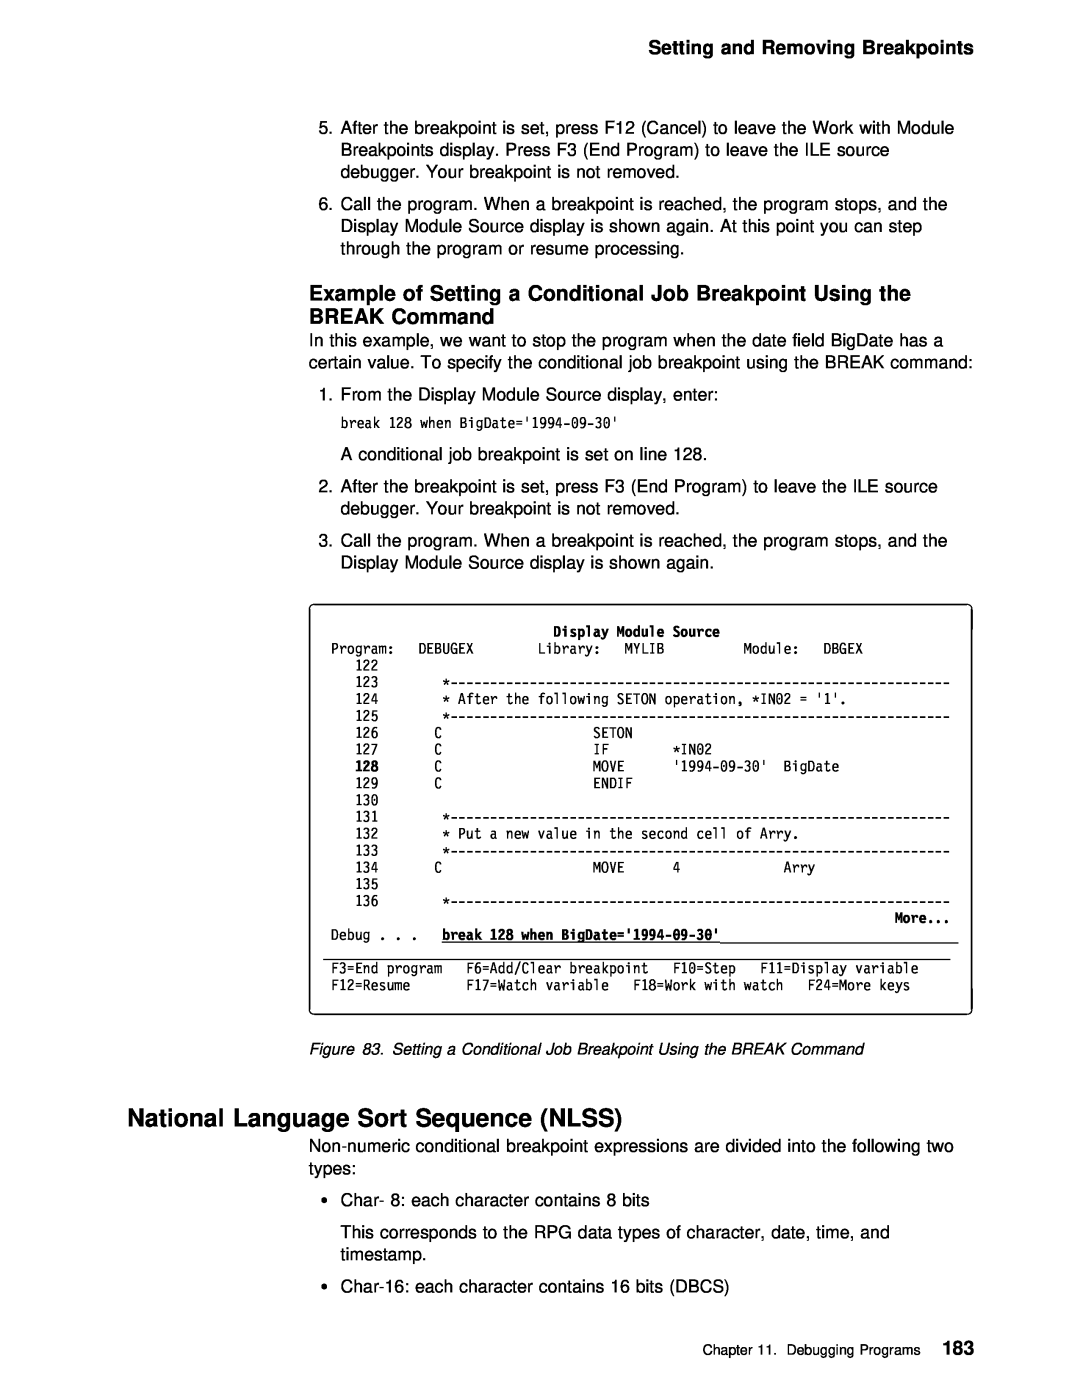 IBM AS/400 manual National Language Sort Sequence NLSS, Command, Setting and Removing Breakpoints 